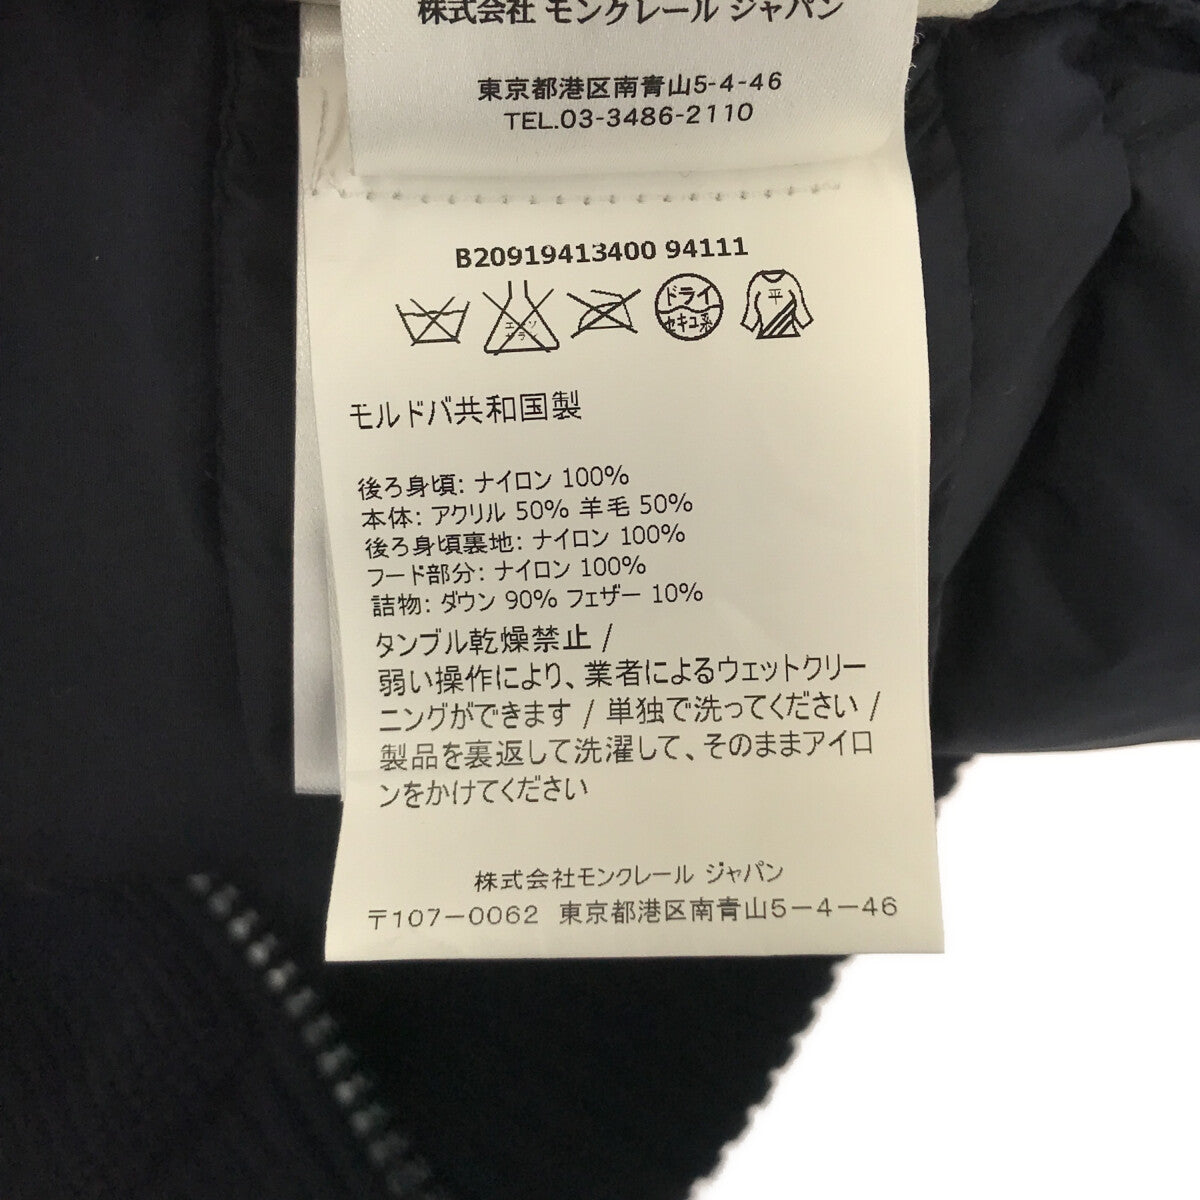 MONCLER / モンクレール | MAGLIONE TRICOT GILET ニット切替ダウン ...